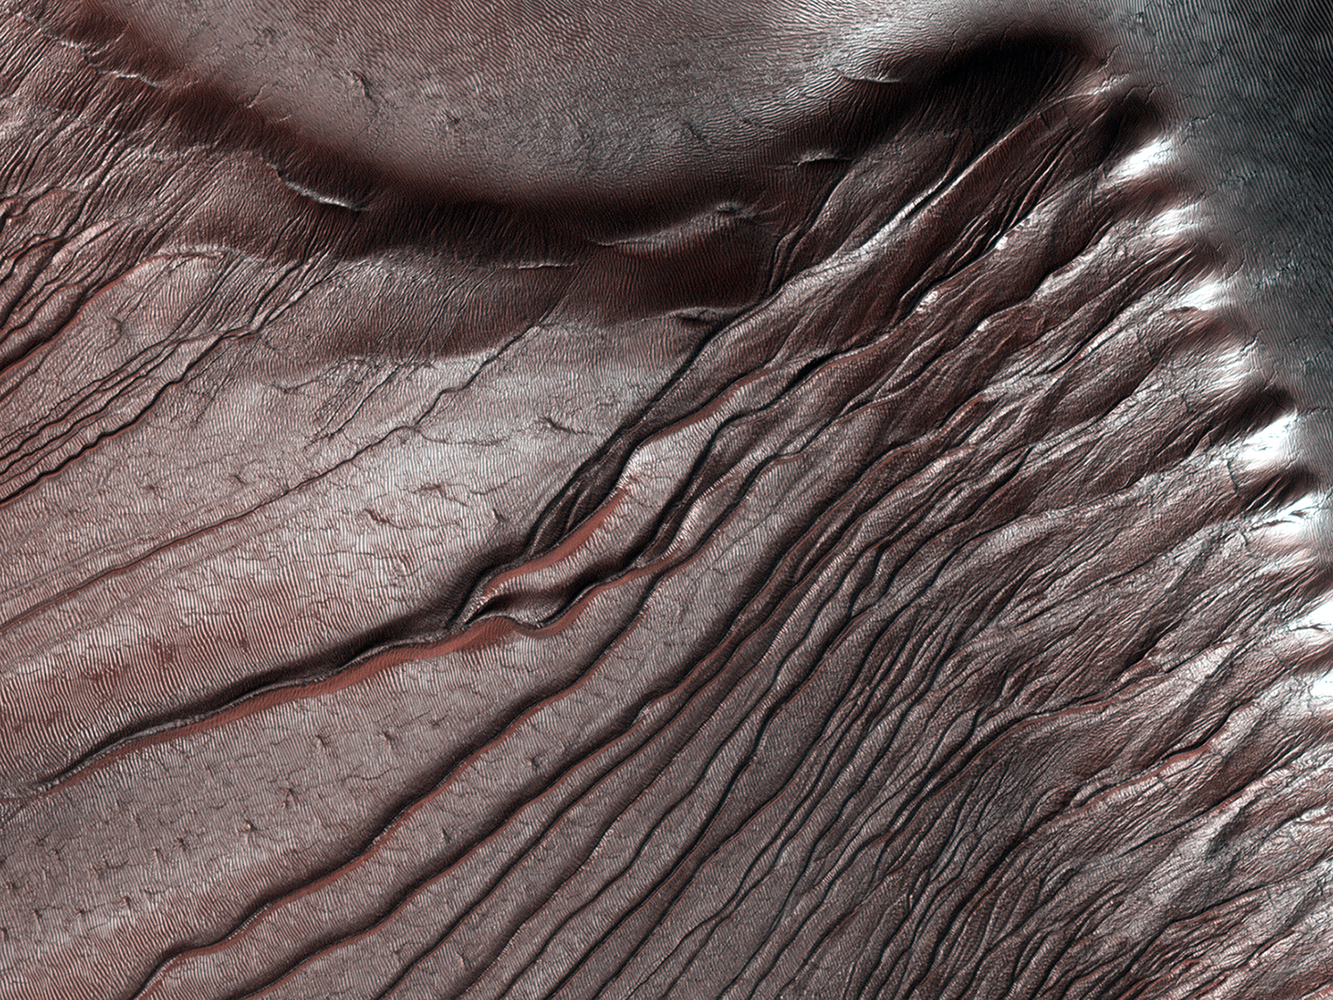 An image from orbit of the Russell Crater dunes on Mars, released on Feb. 5, 2014. Pictures like this help astronomers measure the accumulation of frost year after year in the fall, and its disappearance in the spring. The frost is carbon dioxide ice that often sublimates (going directly from a solid to a gas) during the Martian spring.